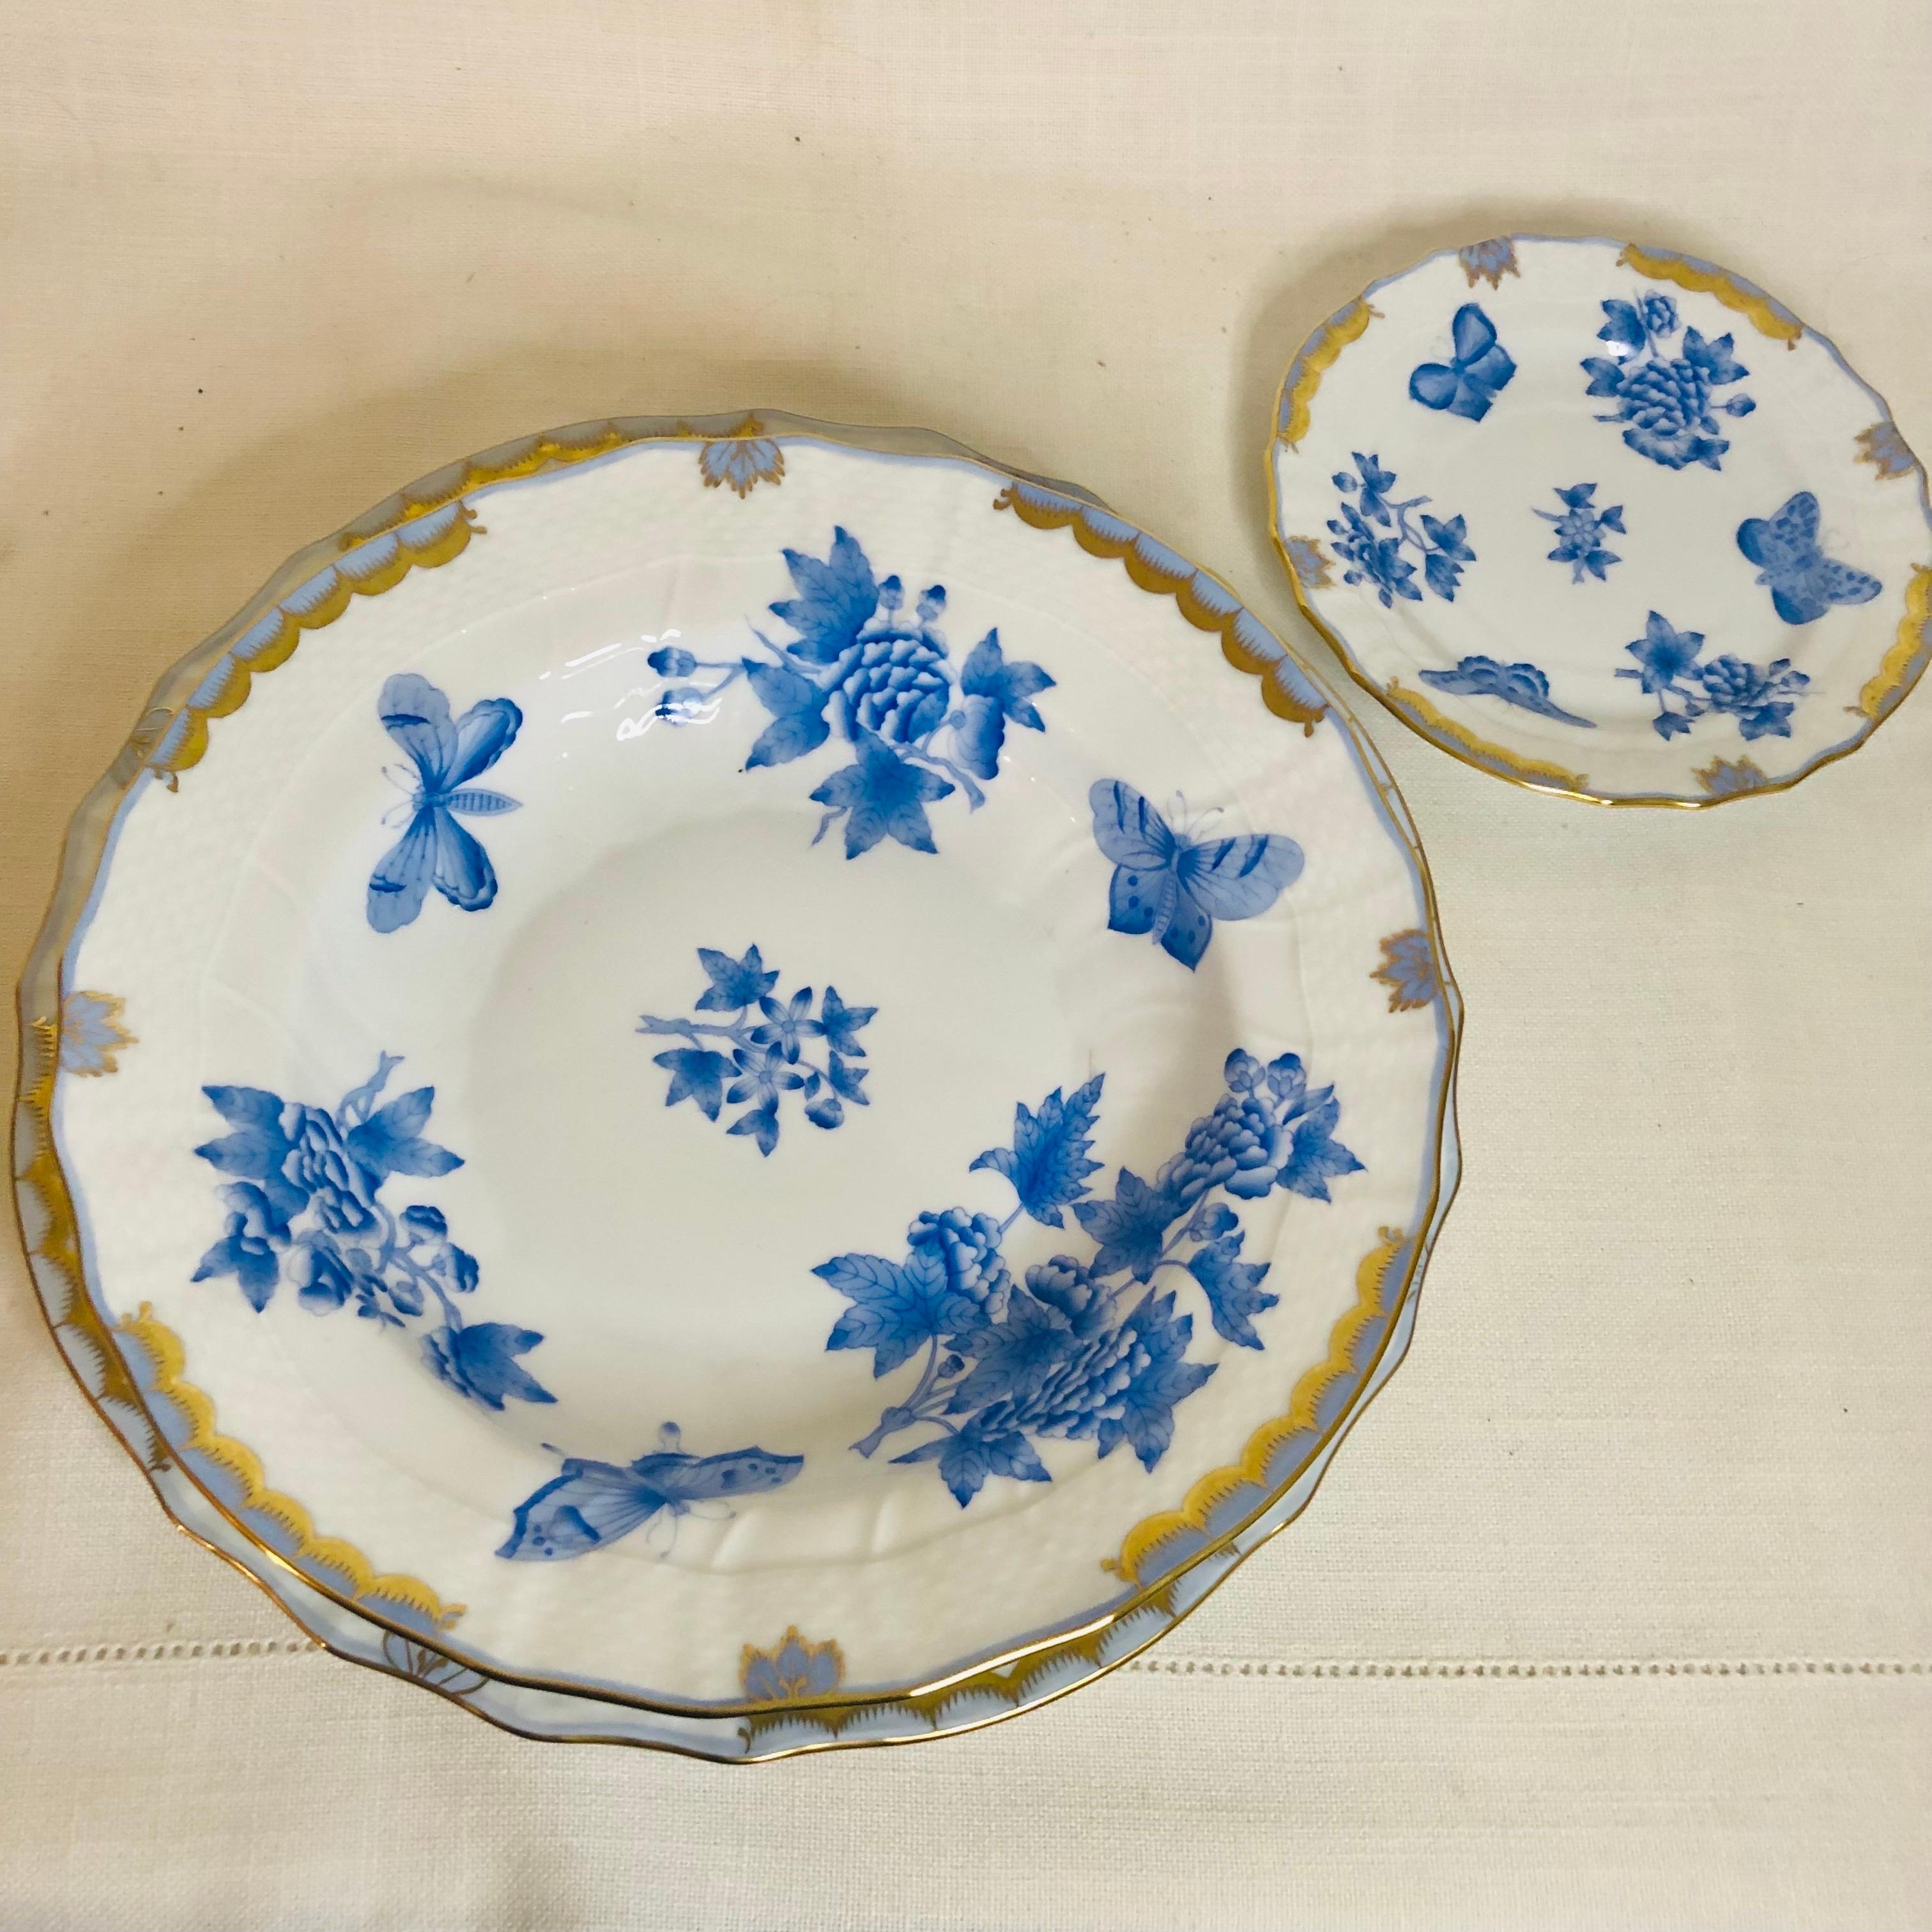 Extensive Herend Fortuna Dinner Service Painted with Butterflies and Flowers In Good Condition For Sale In Boston, MA